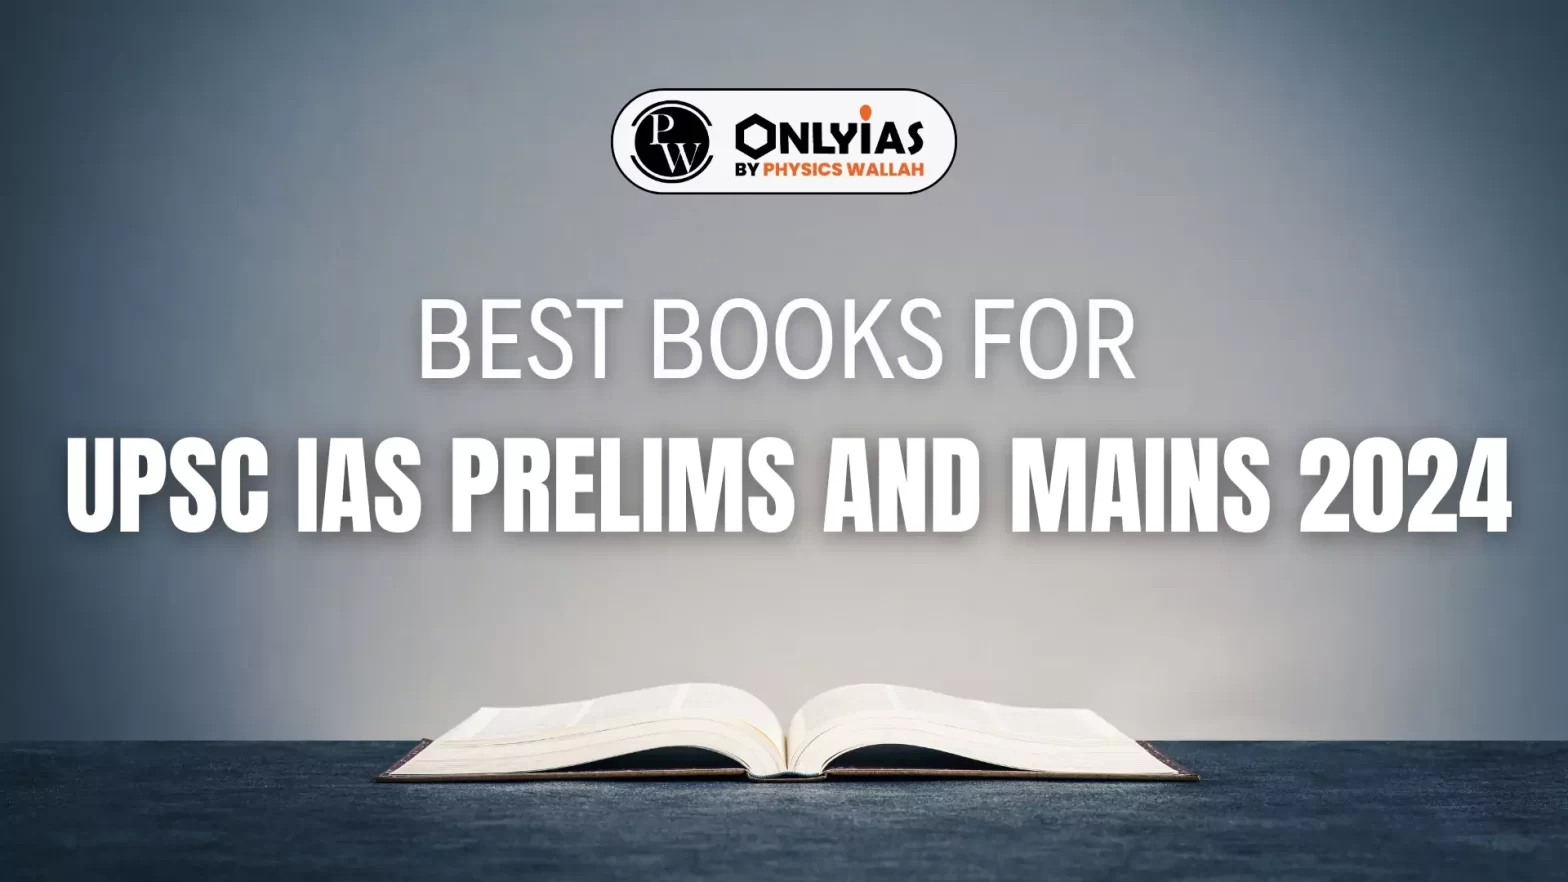 Best Books for UPSC Prelims and Mains 2024